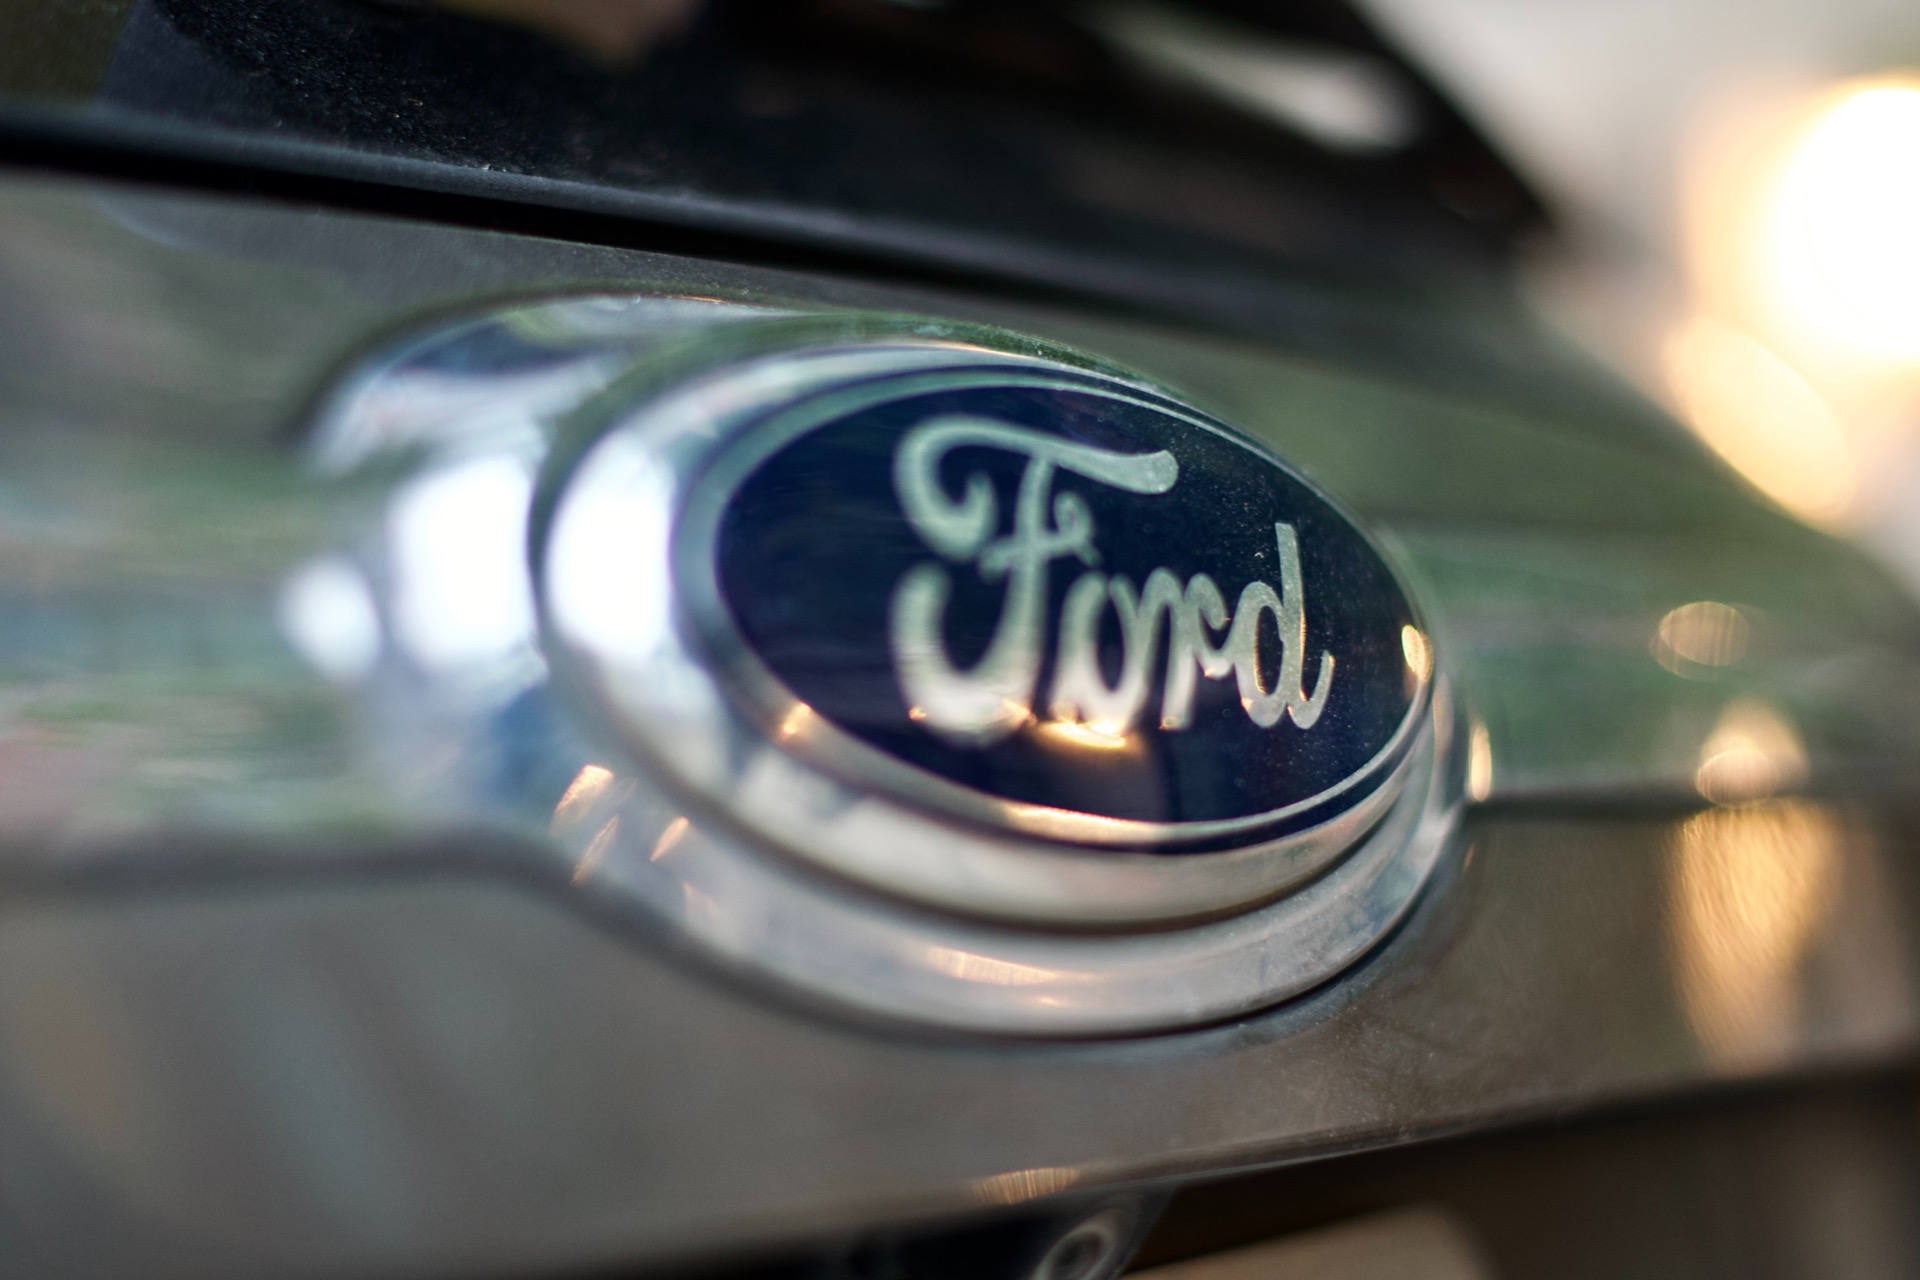 The Ford Logo Design Evolution Through the Years Showcases the